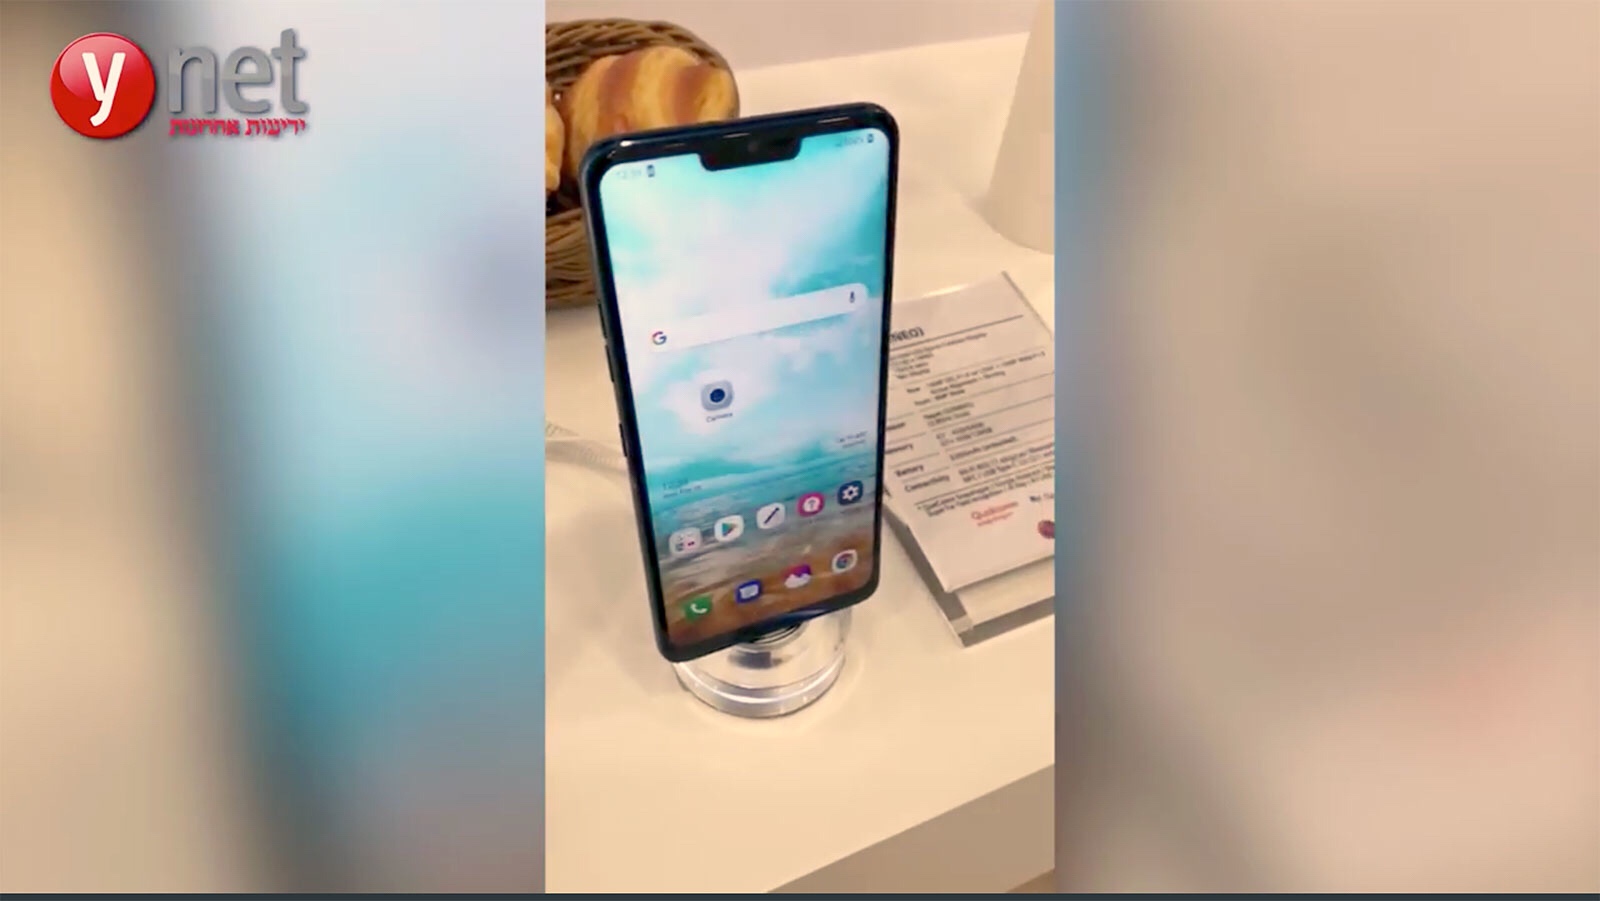 It looks like an LG G7 made its way to Mobile World Congress after all